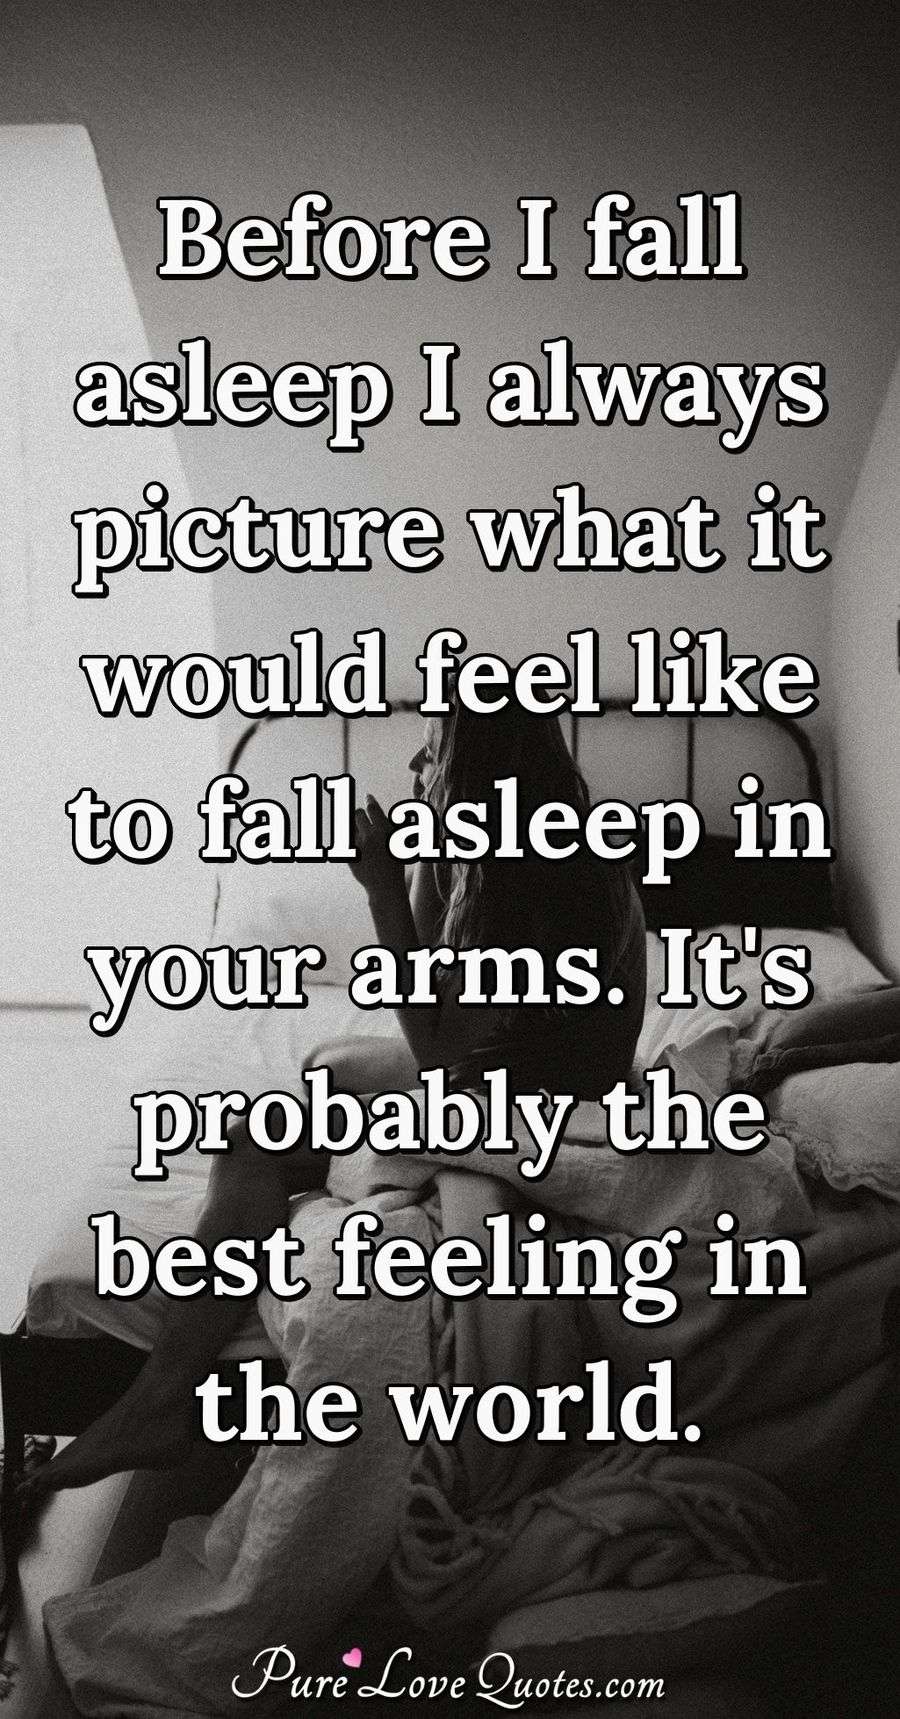 Before I fall asleep I always picture what it would feel like to fall asleep in your arms. It's probably the best feeling in the world. - Anonymous